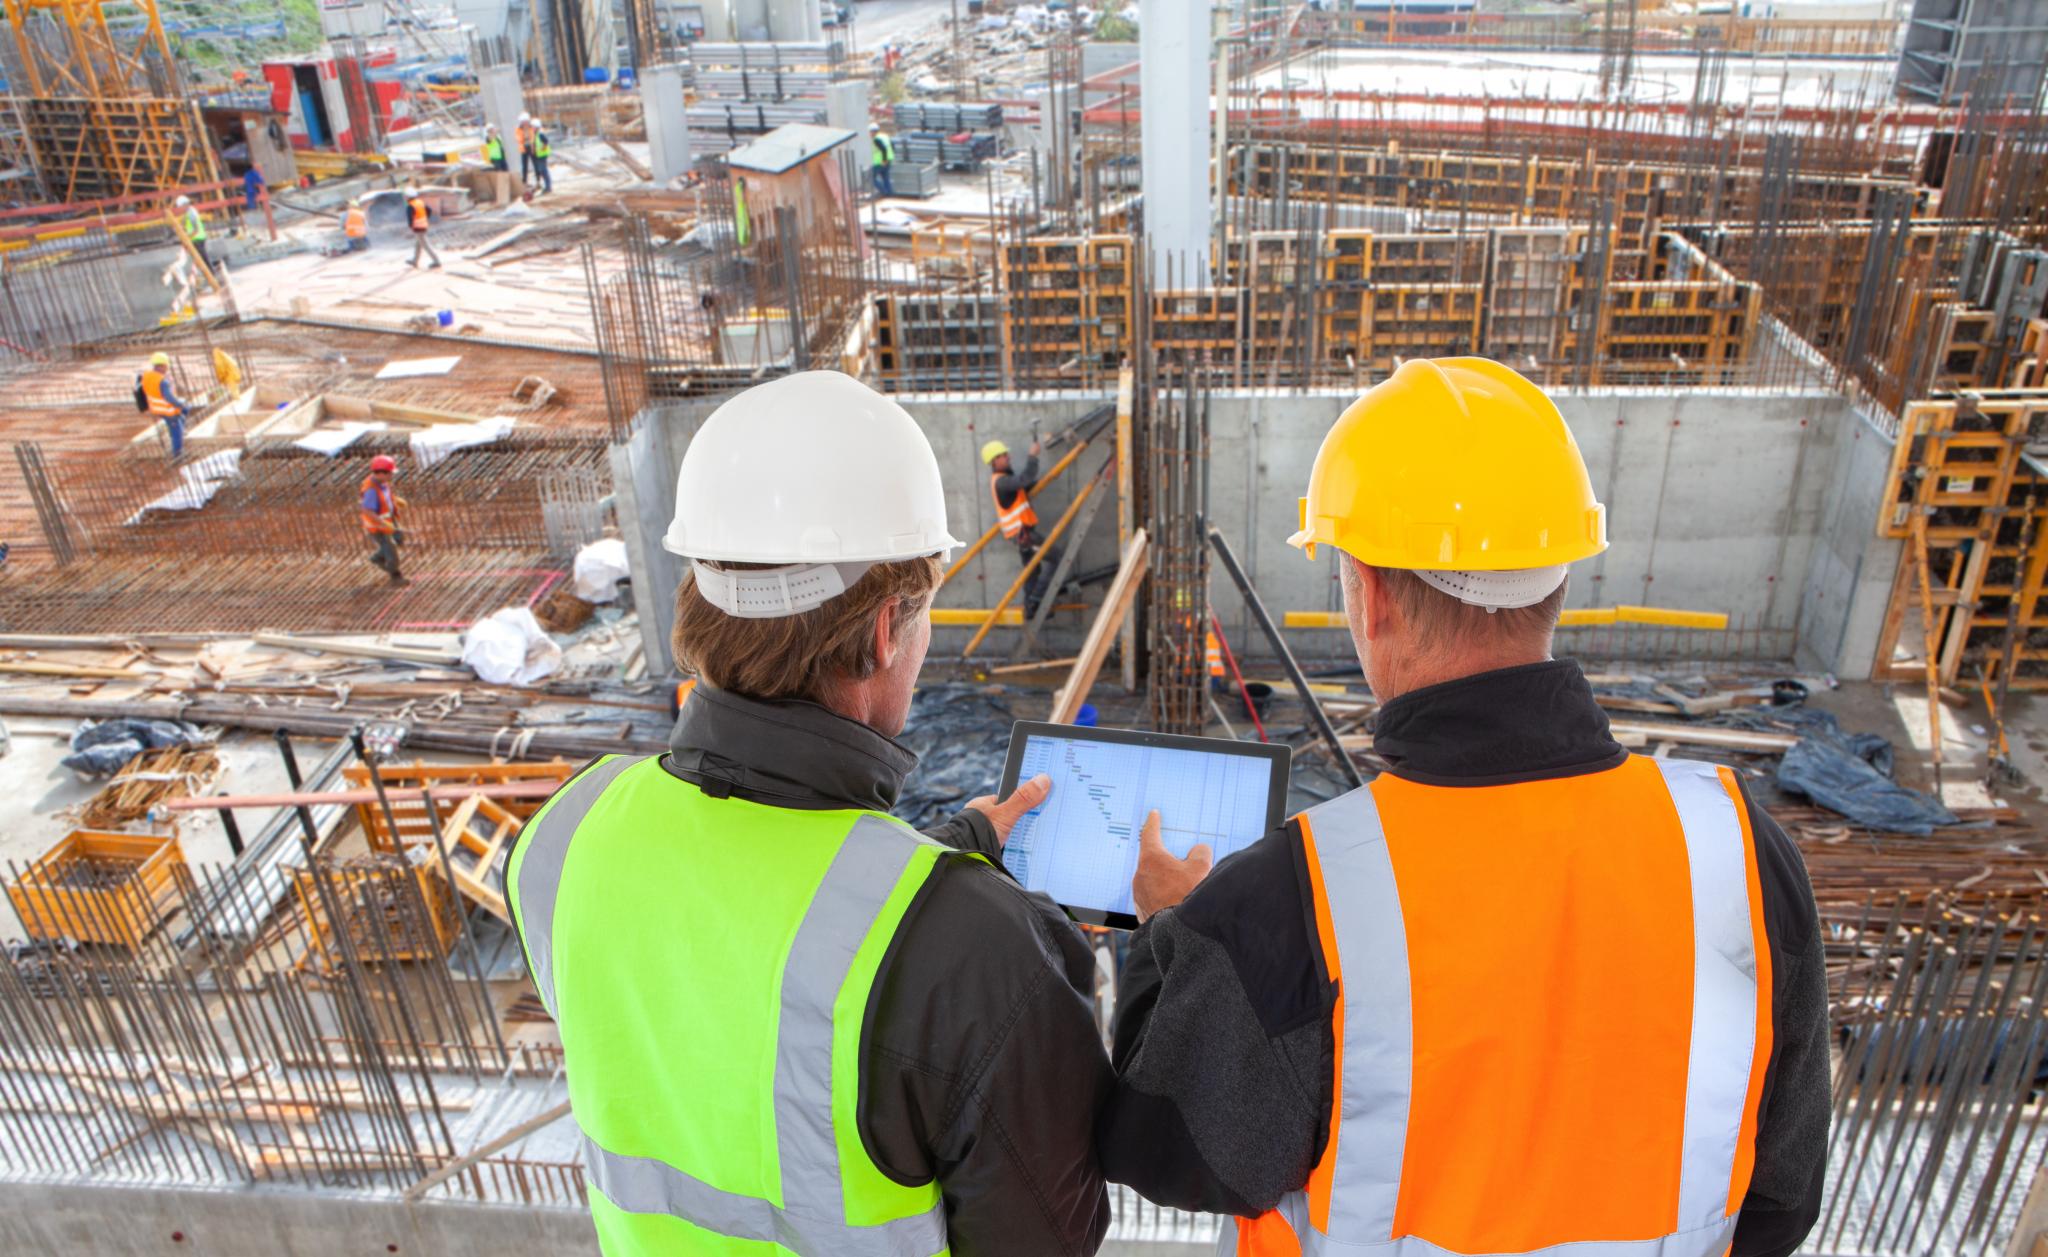 an image of construction and architecture personnel at an active construction site